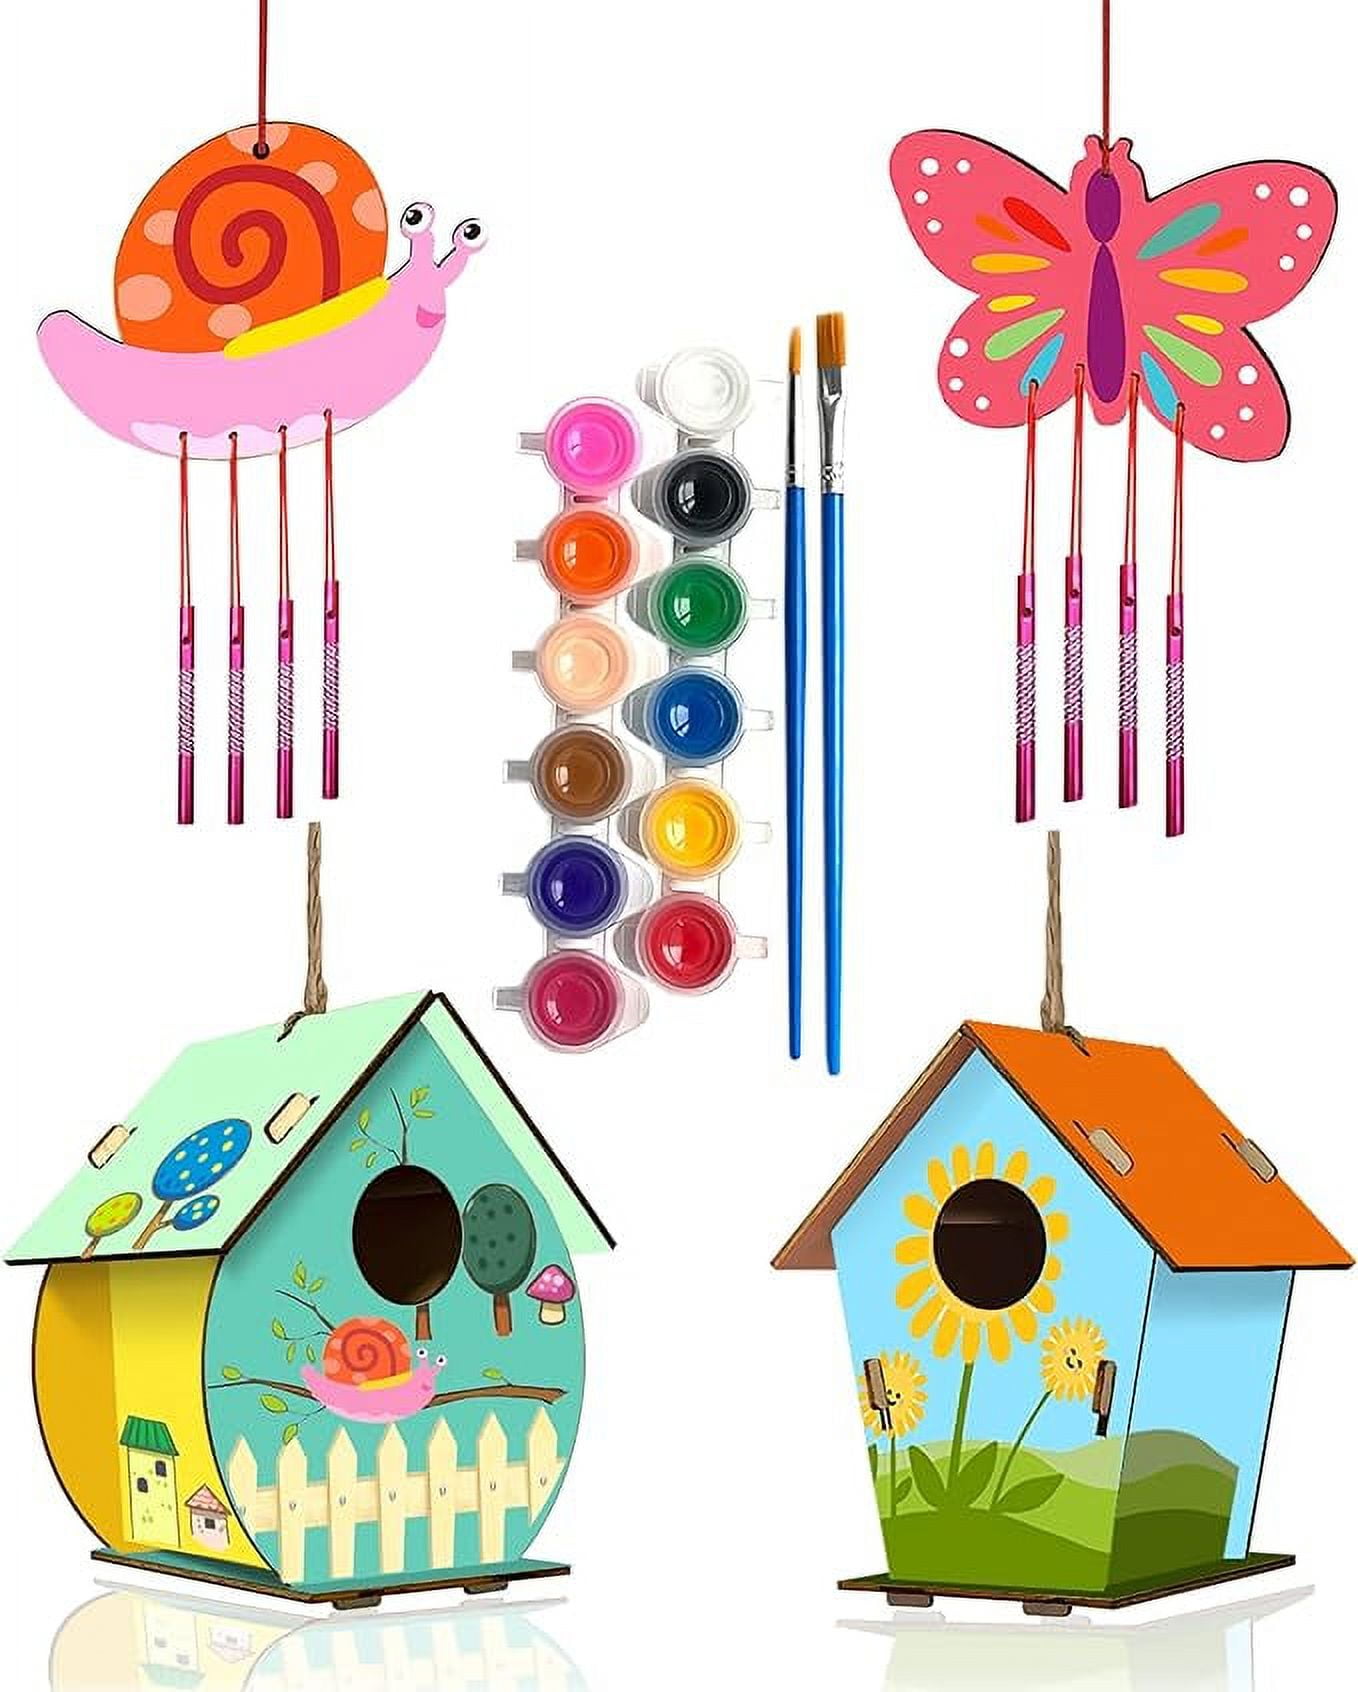 4M Make A Wind Chime Kit - Arts & Crafts Construct & Paint A Wind Powered  Musical Chime DIY Gift for Kids, Boys & Girls